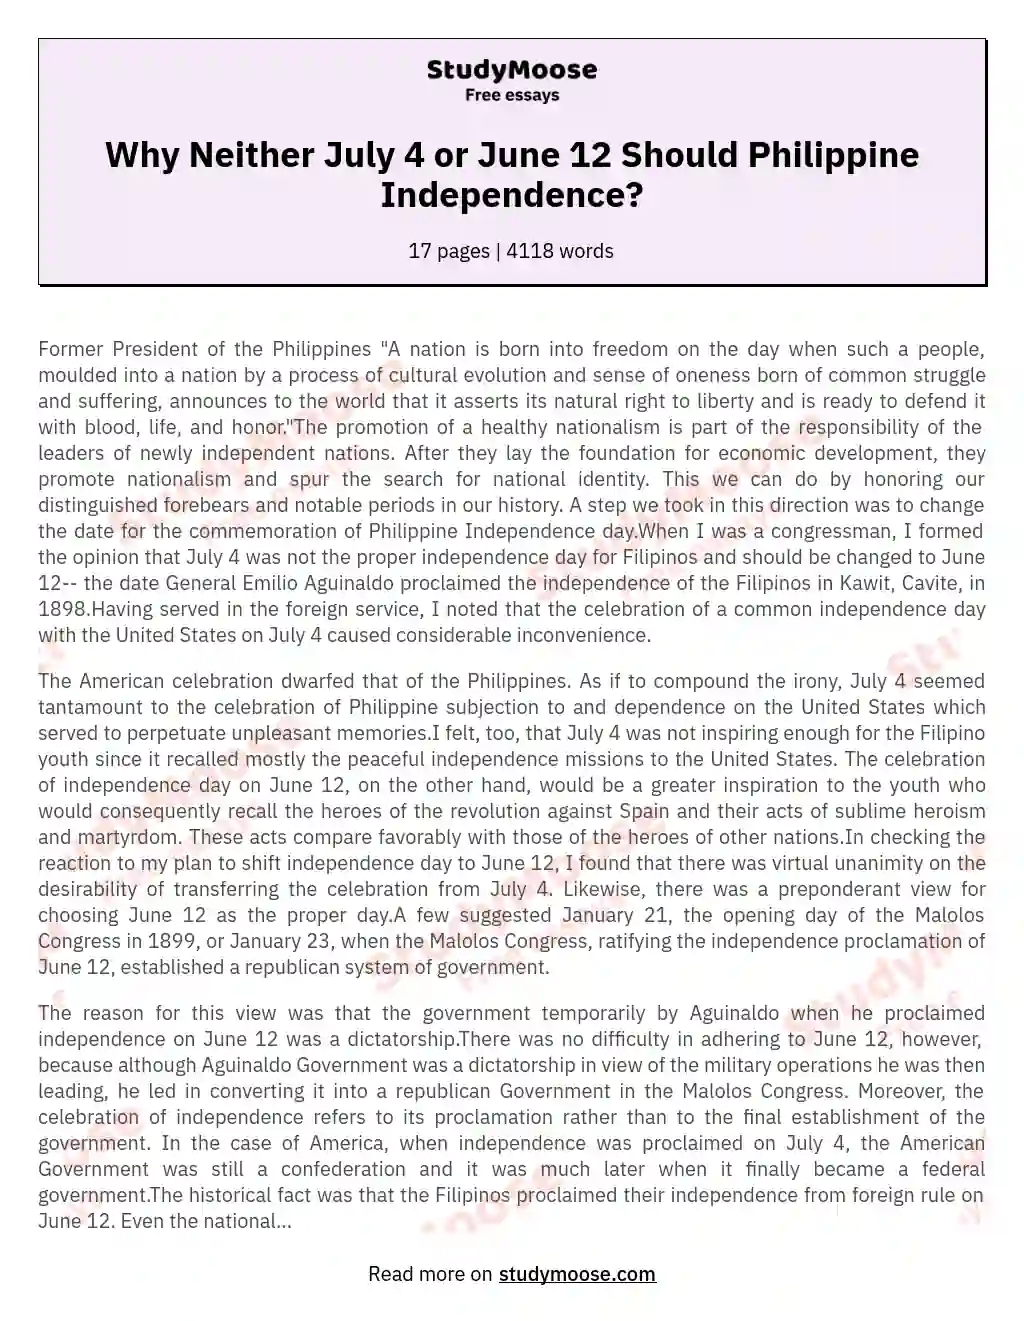 essay about the proclamation of philippine independence